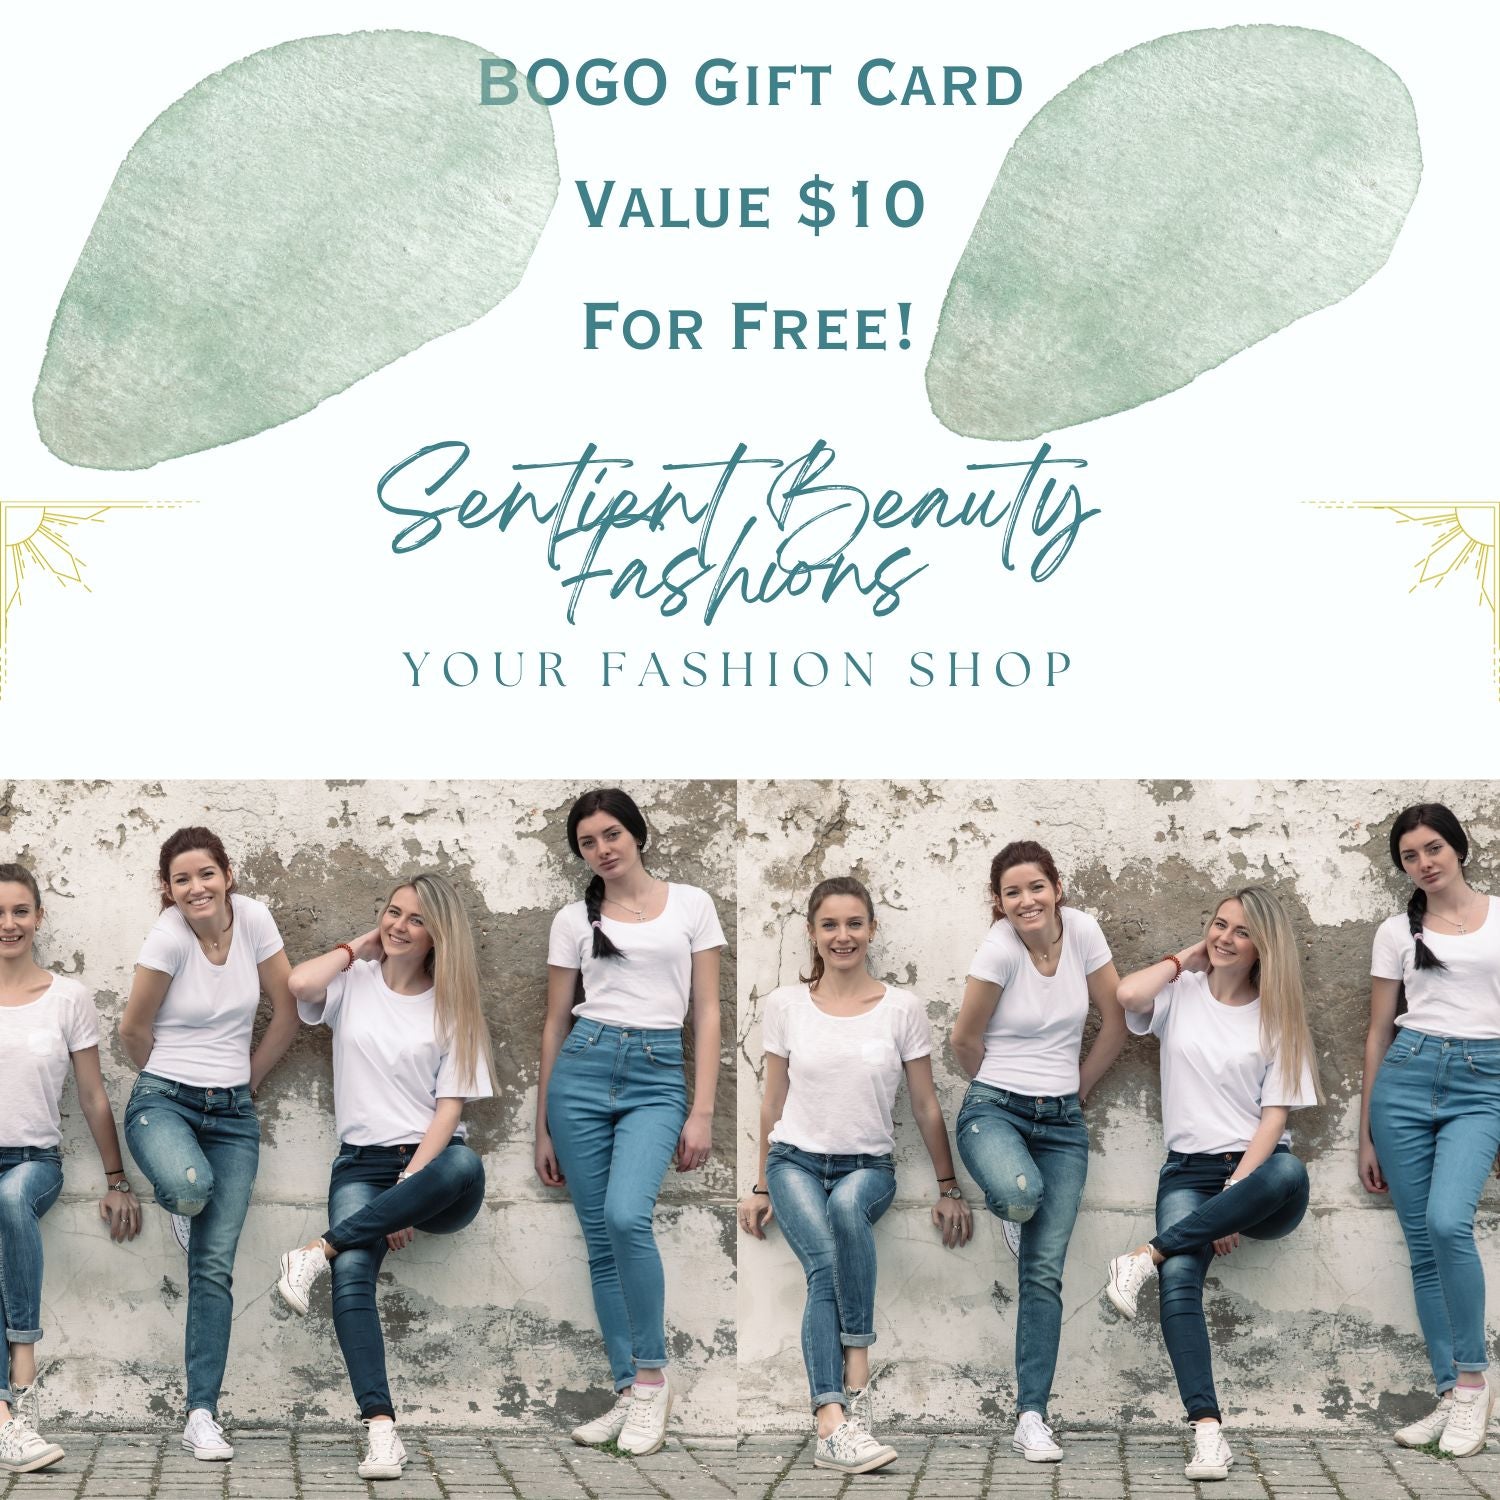 Gray Add this FREE $10 Gift Card to your cart, then spend $40 to make it free Sentient Beauty Fashions